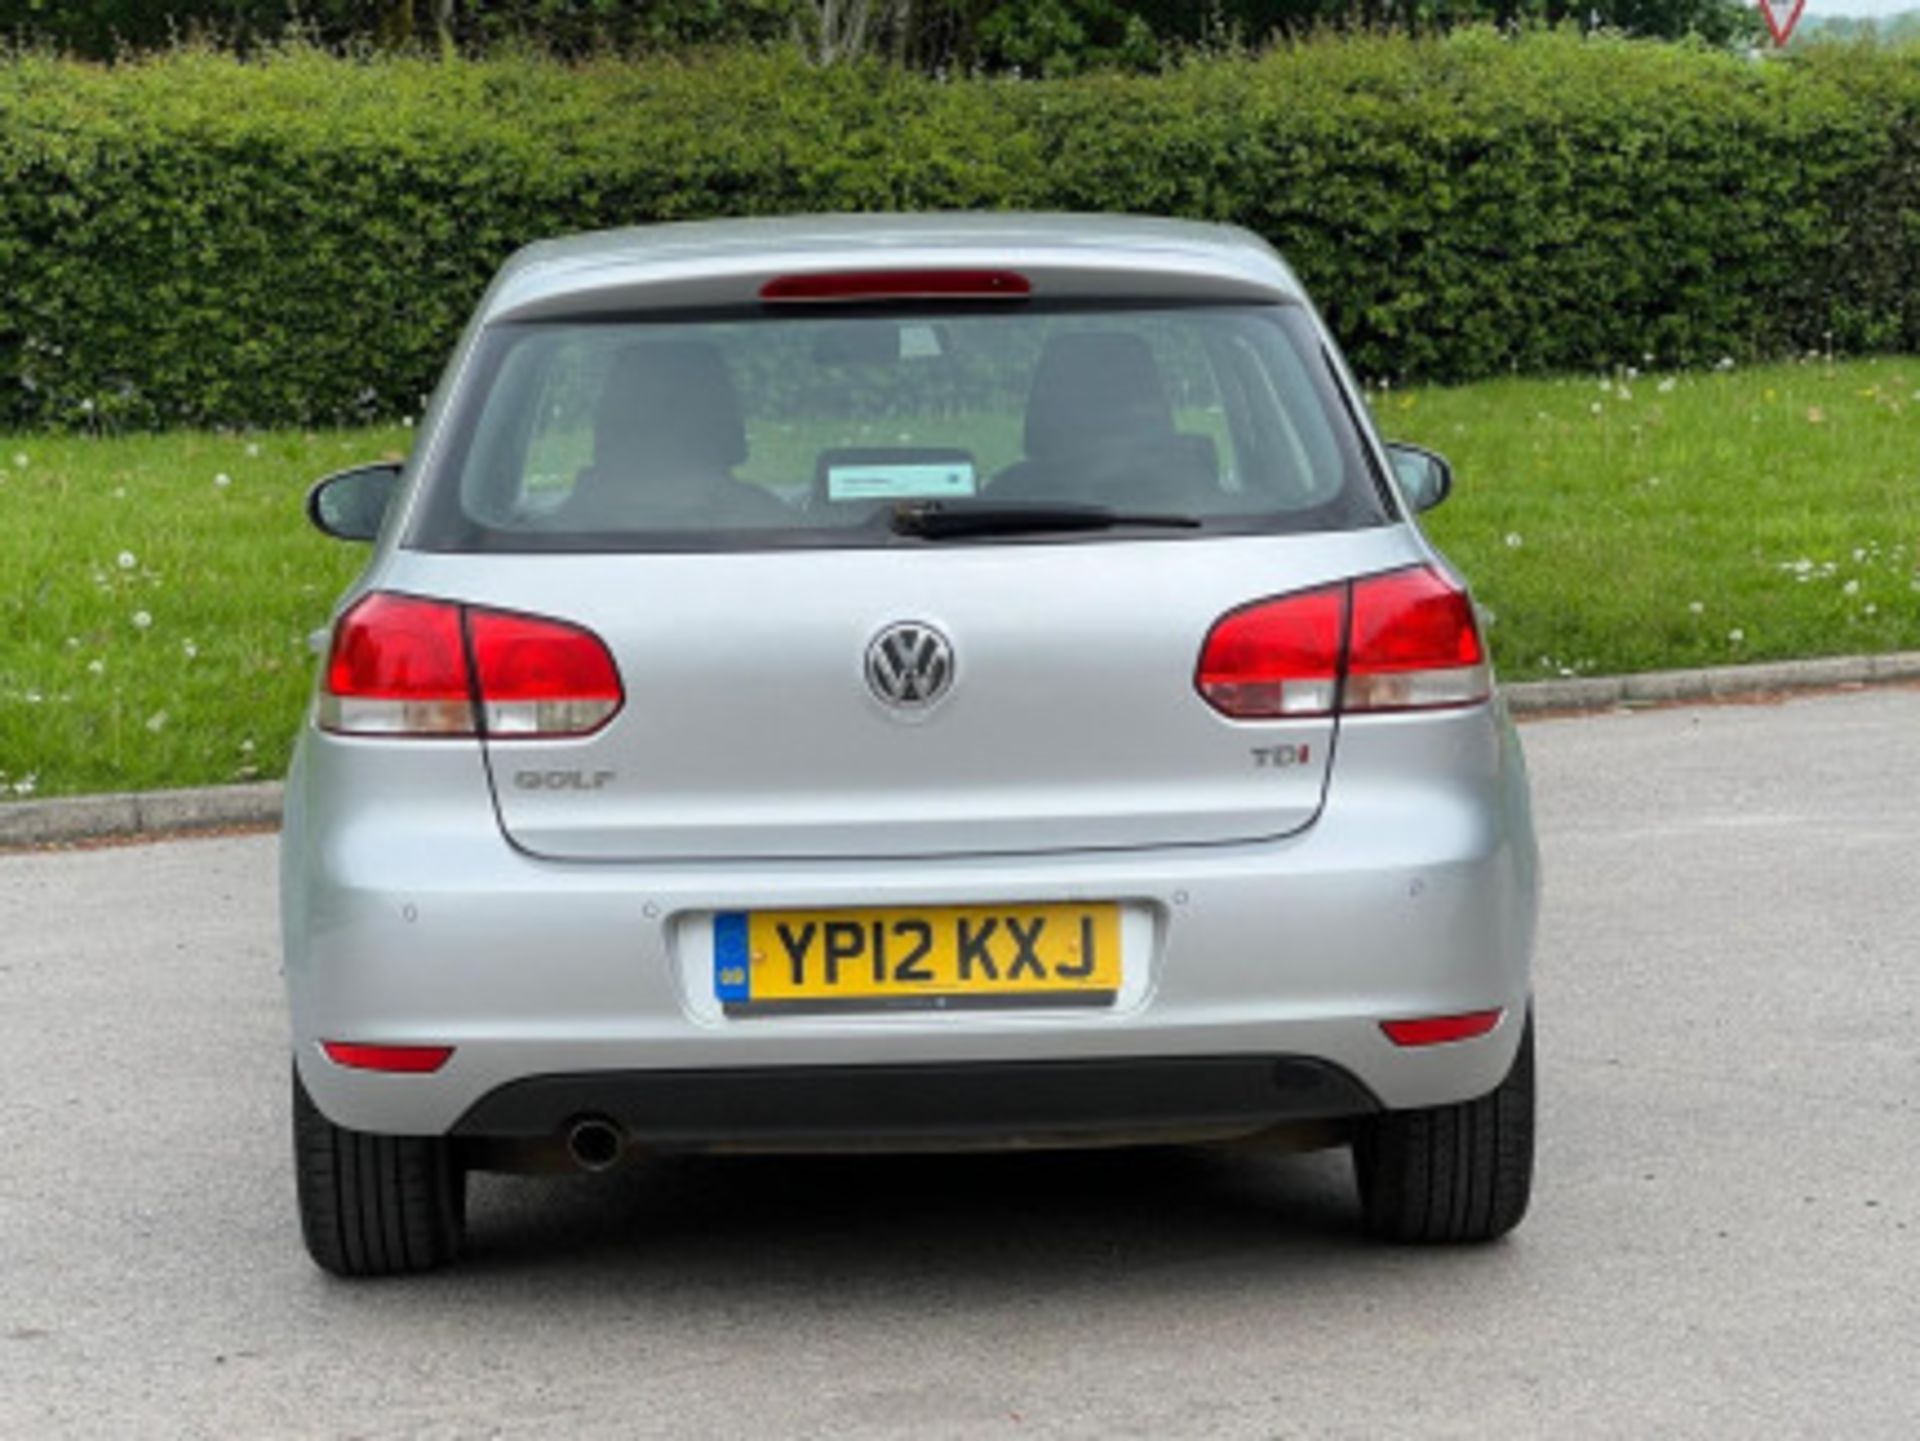 IMPECCABLE 2012 VOLKSWAGEN GOLF 1.6 TDI MATCH >>--NO VAT ON HAMMER--<< - Image 58 of 116